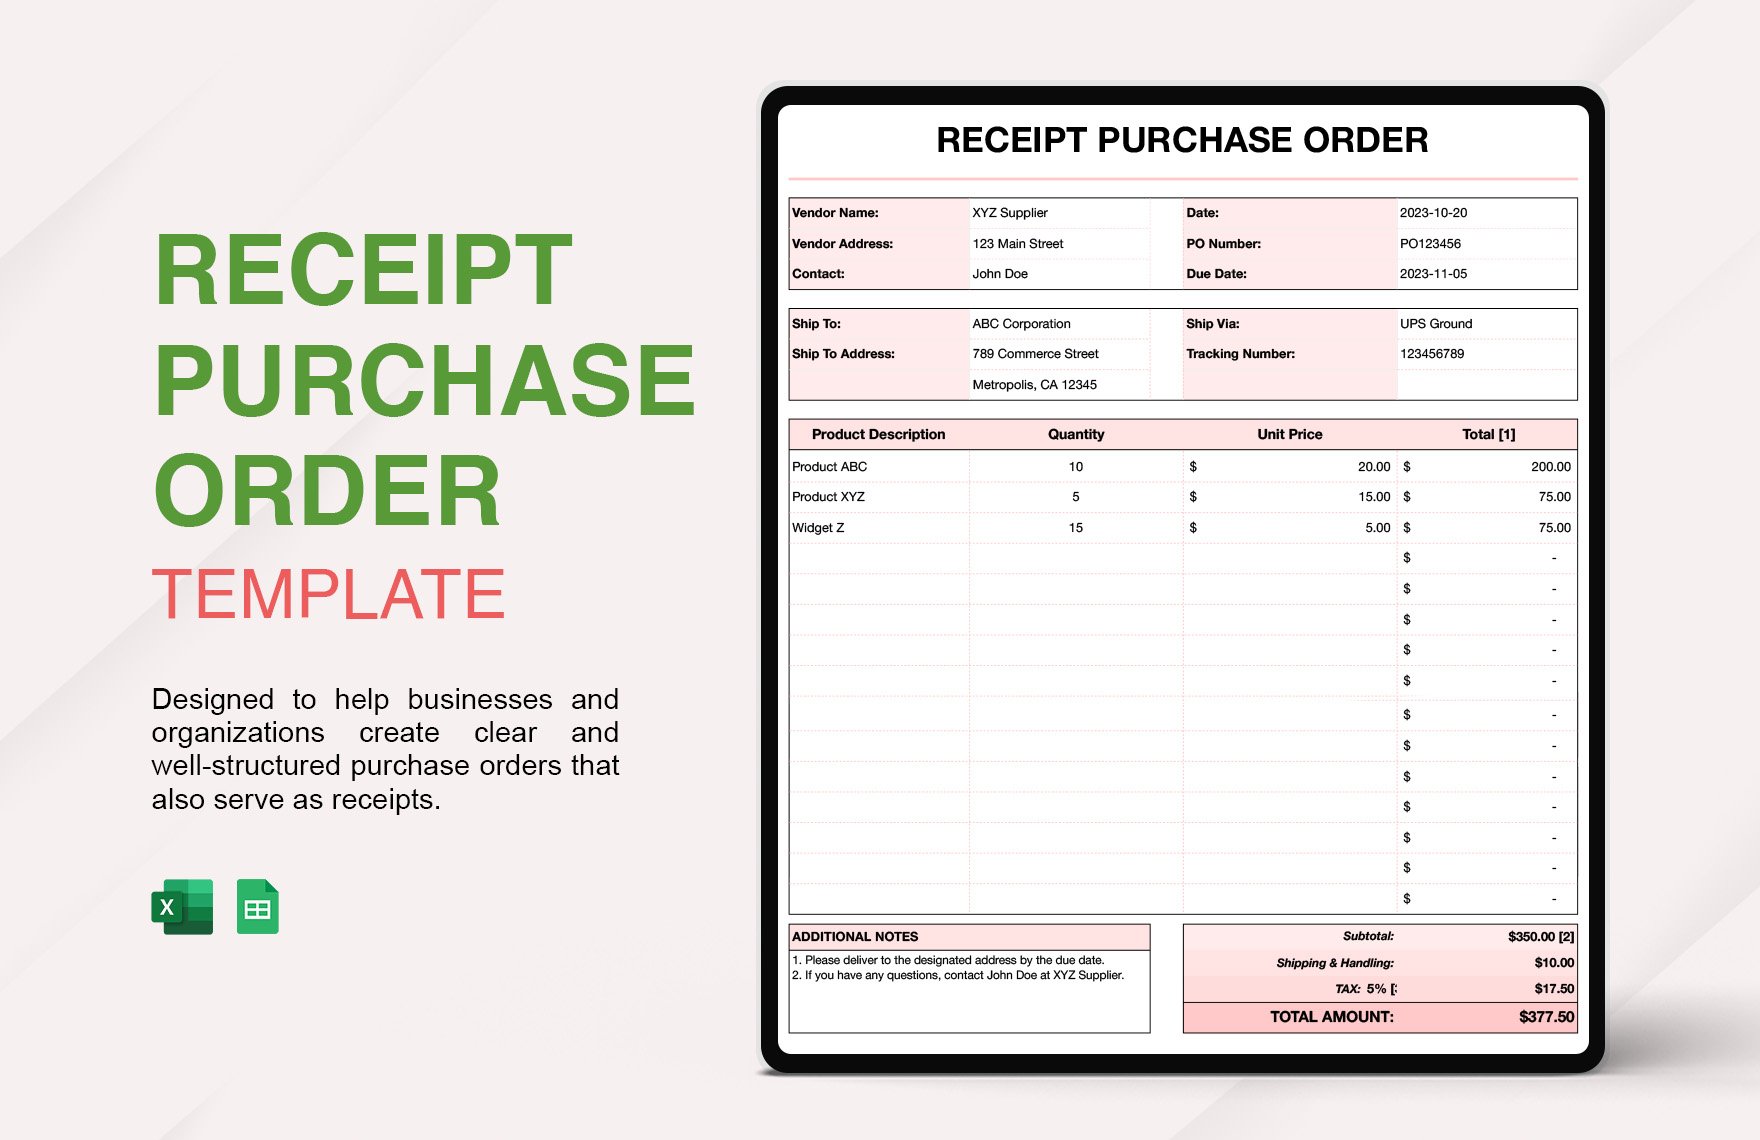 Receipt Purchase Order Template